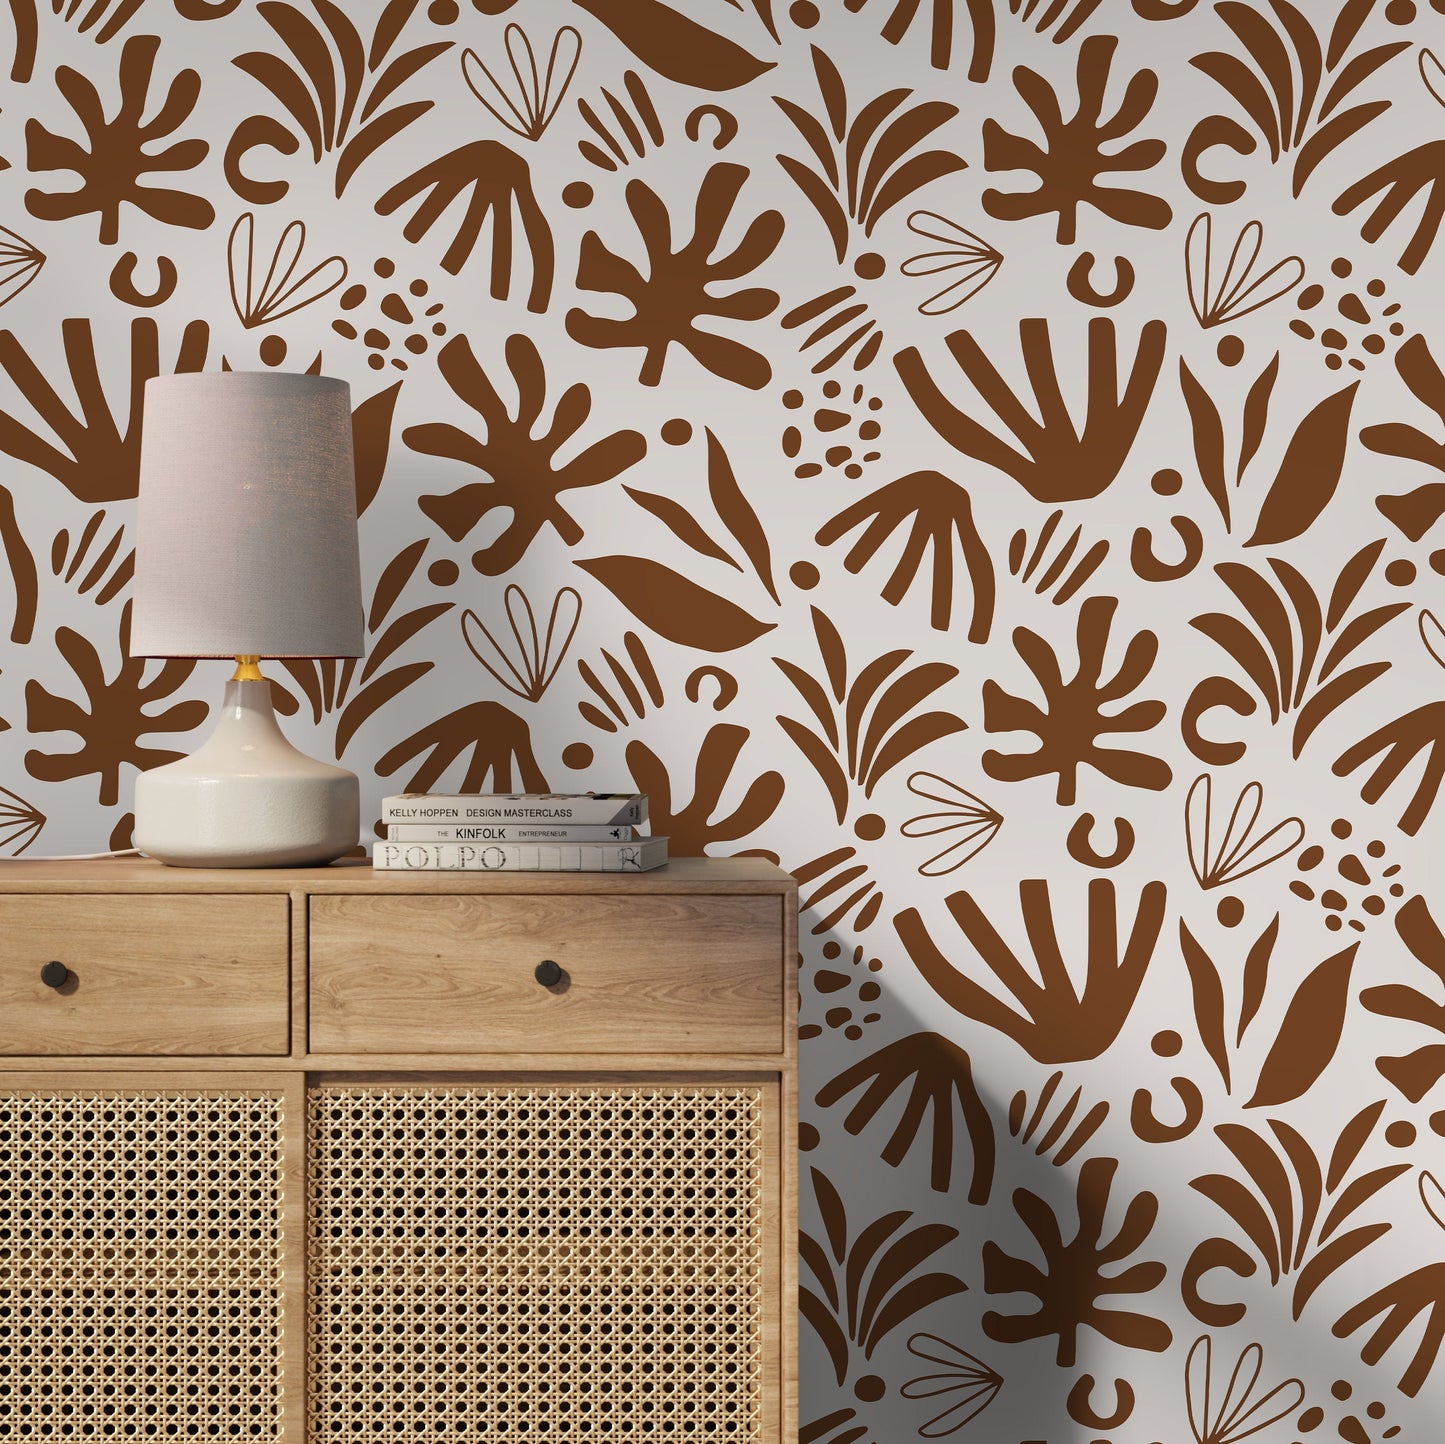 Brown Abstract Leaf Wallpaper Boho Wallpaper Peel and Stick and Traditional Wallpaper - D682